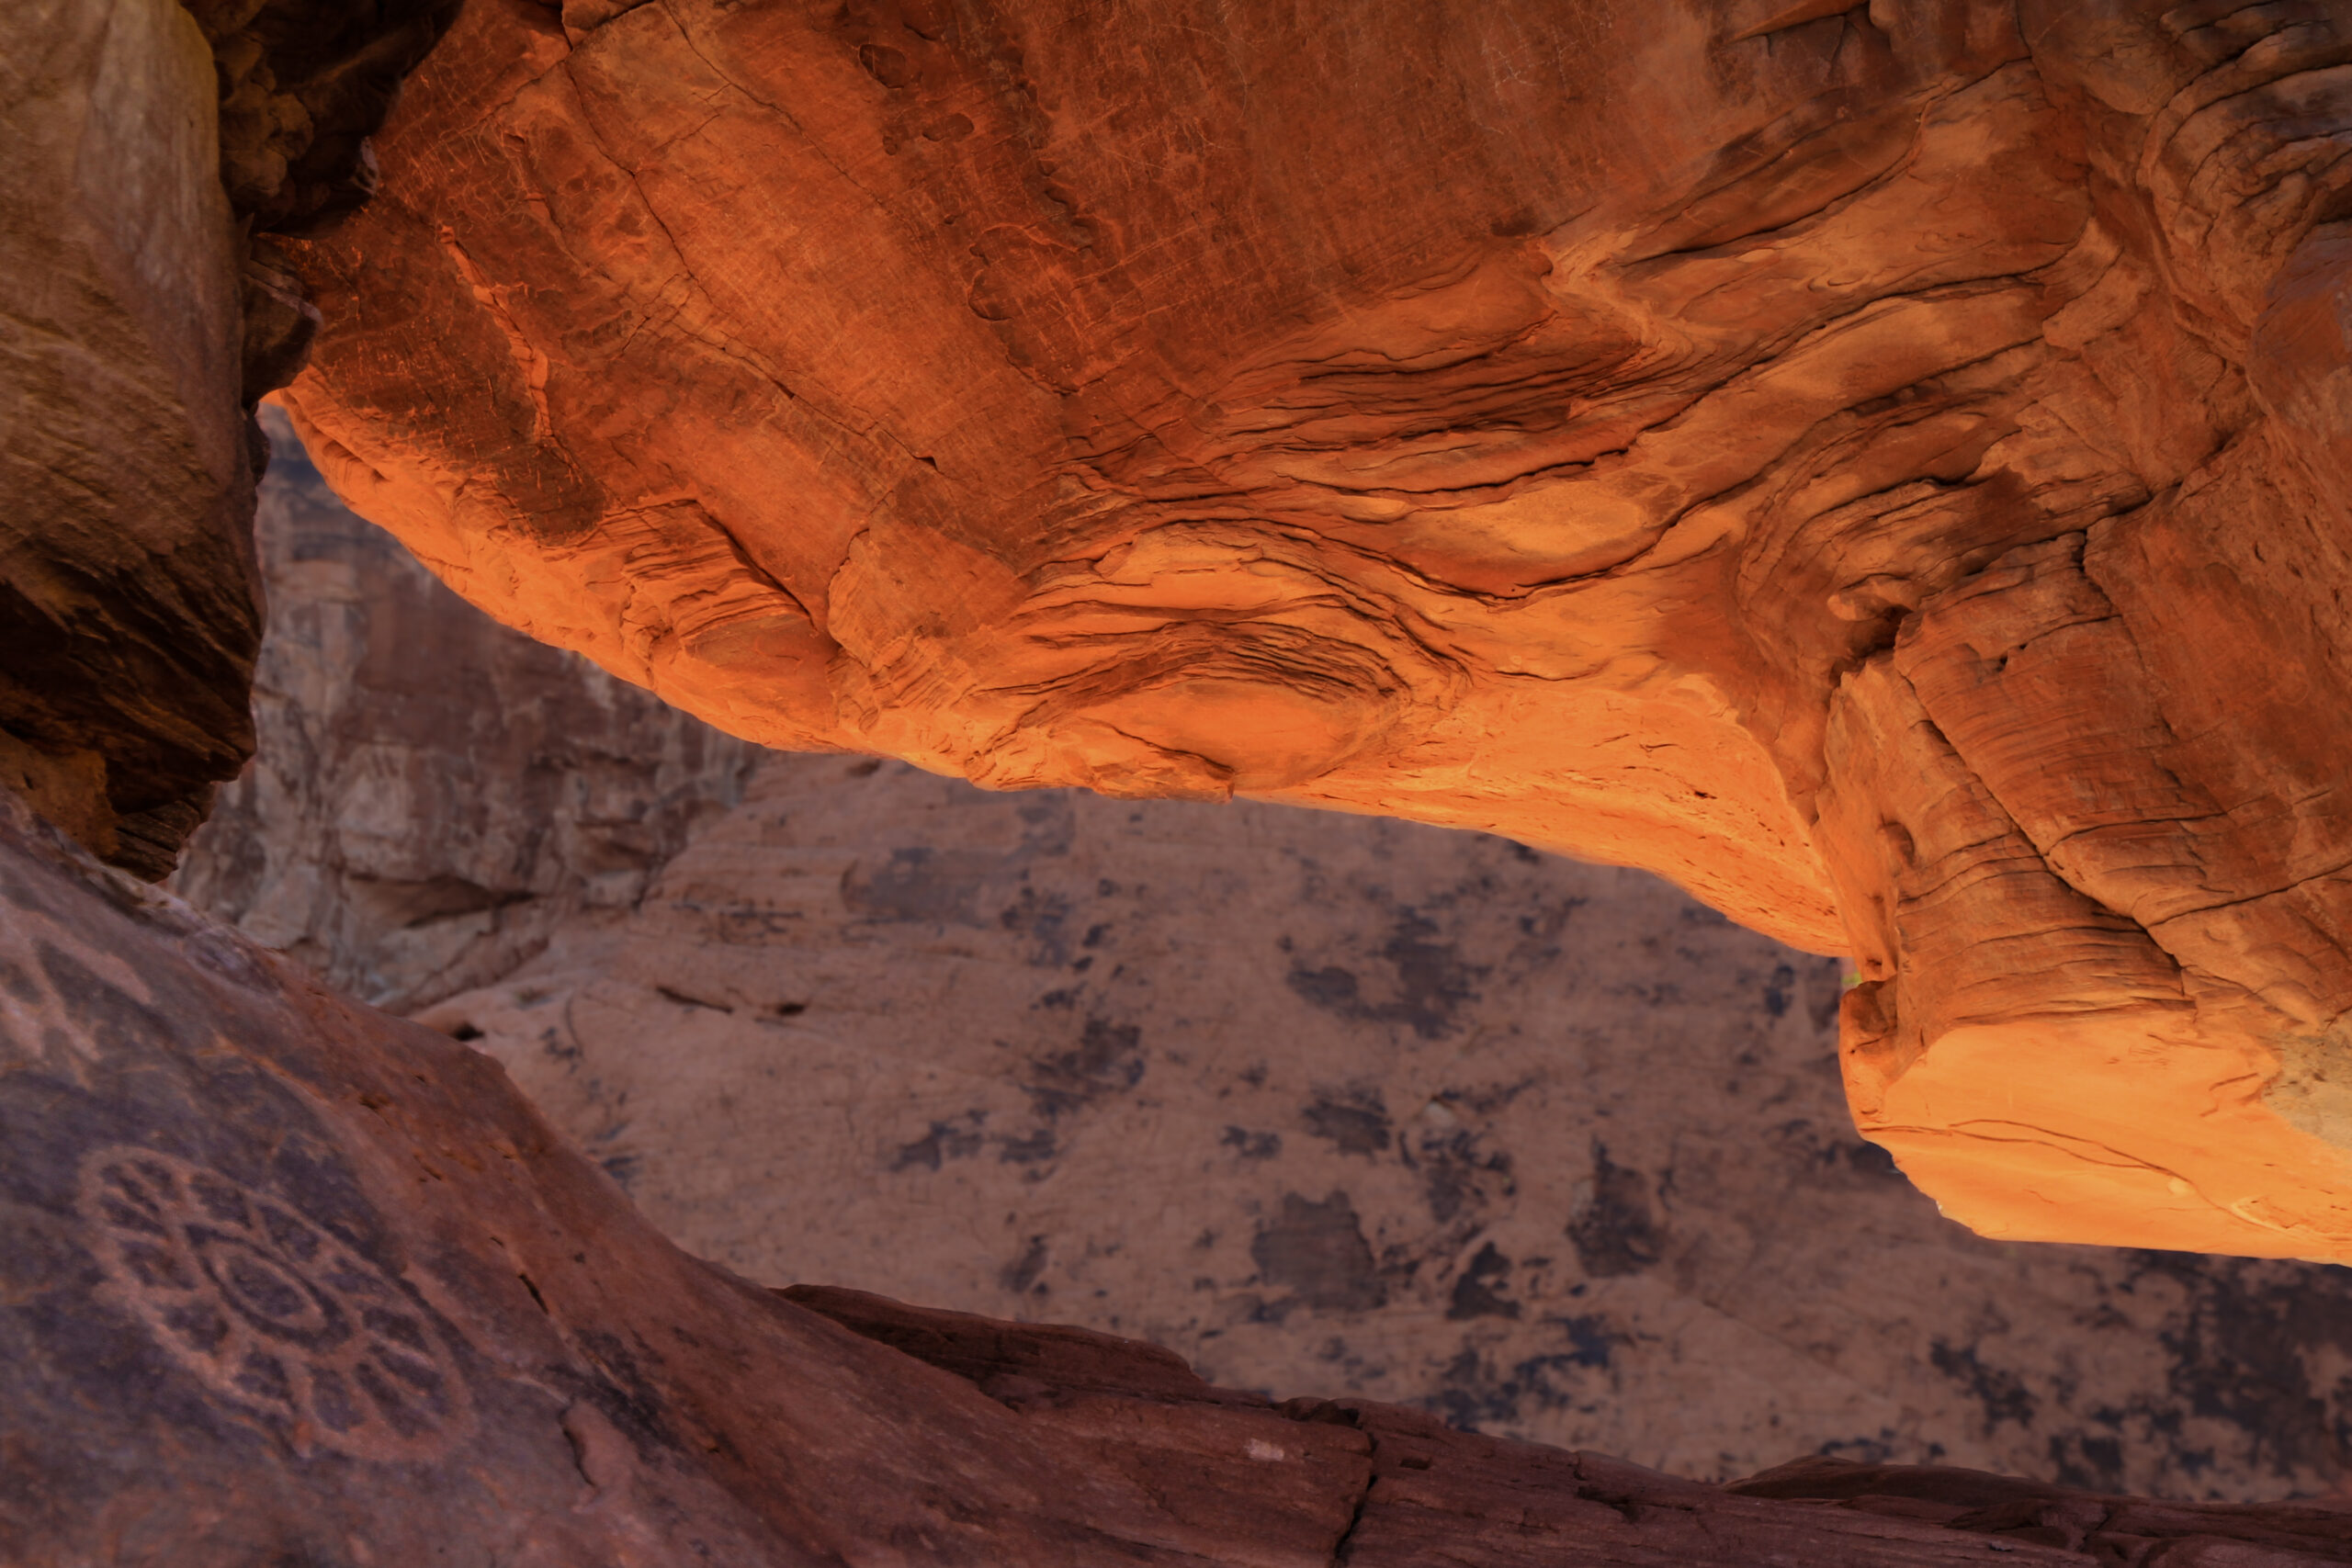 Petroglyph in Valley of Fire from Nevada nature stock photography website